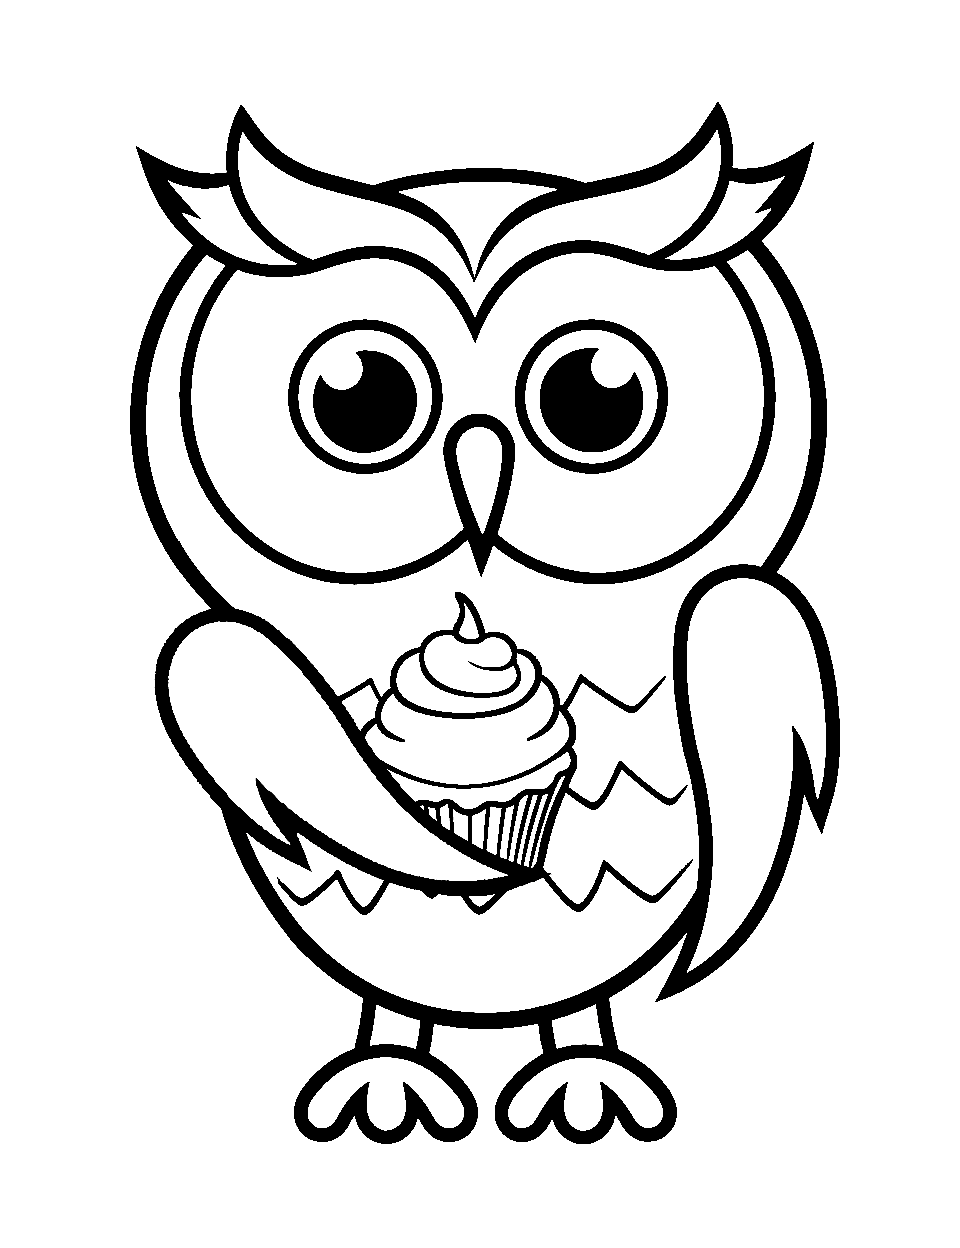 Owl with a Cupcake Coloring Page - A cute owl holding a delicious cupcake.